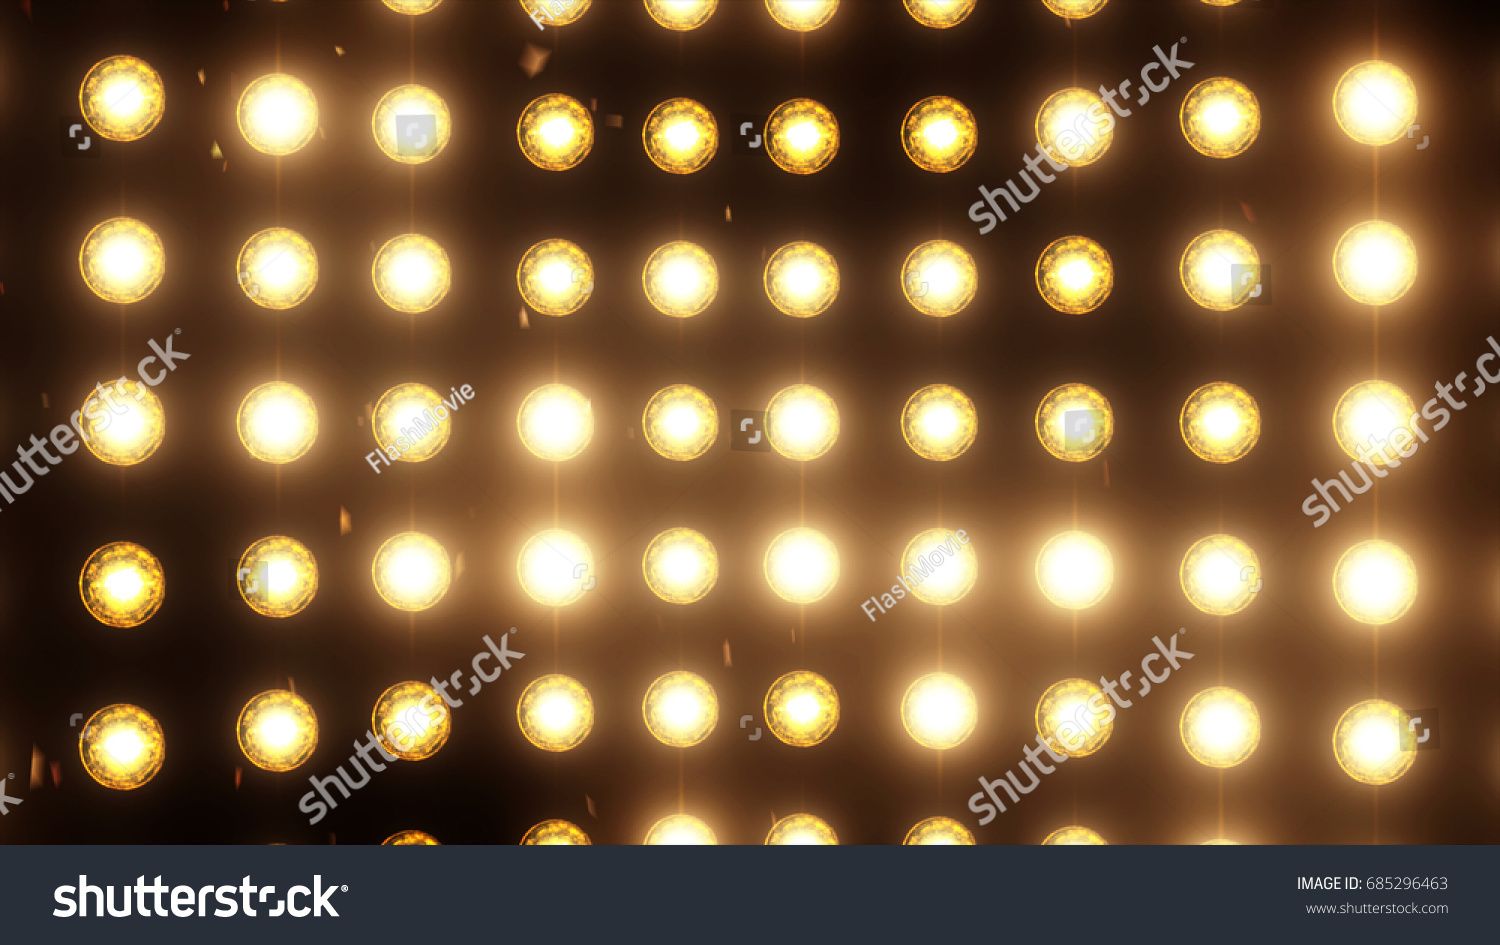 Bright Flood Lights Background With Particles And Glow Gold Tint